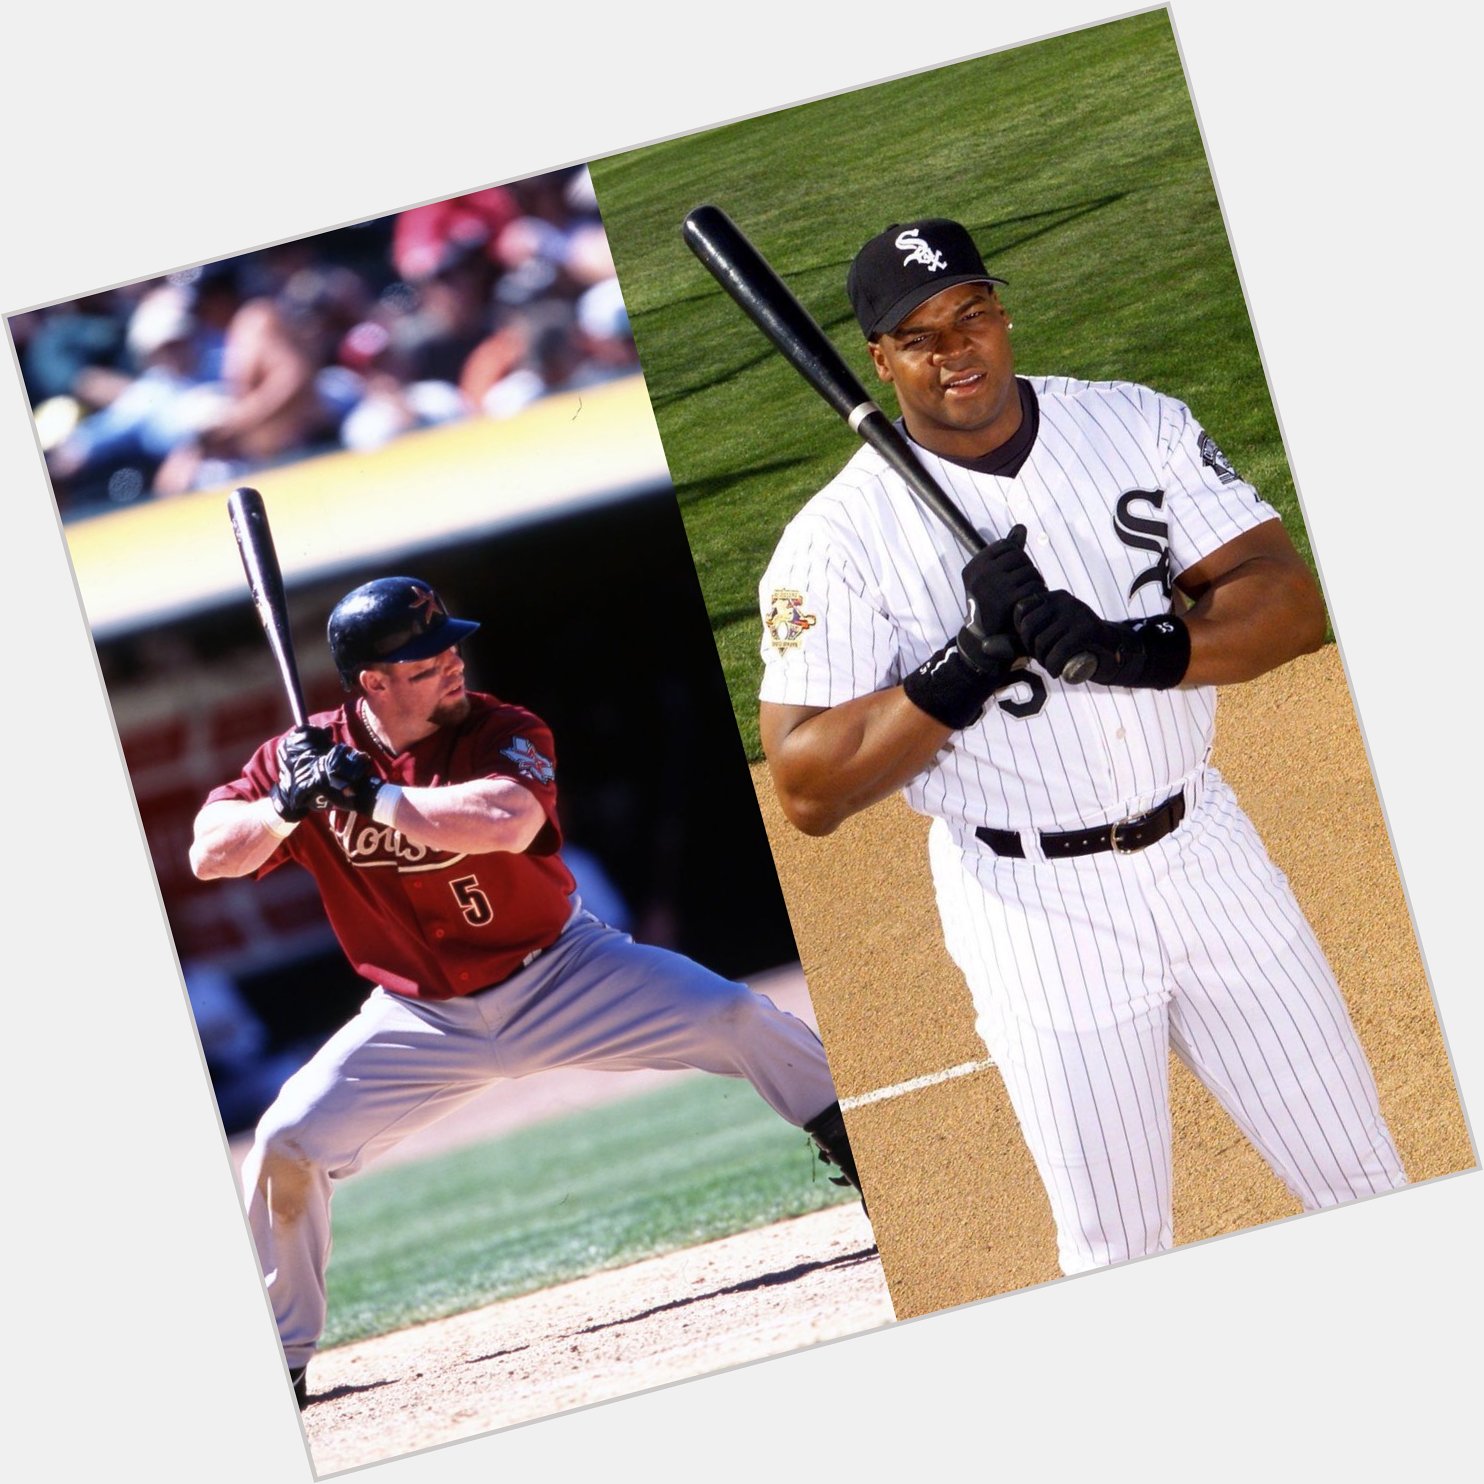 Happy Birthday to 2 of the best hitters of all time, Frank Thomas and Jeff Bagwell! 